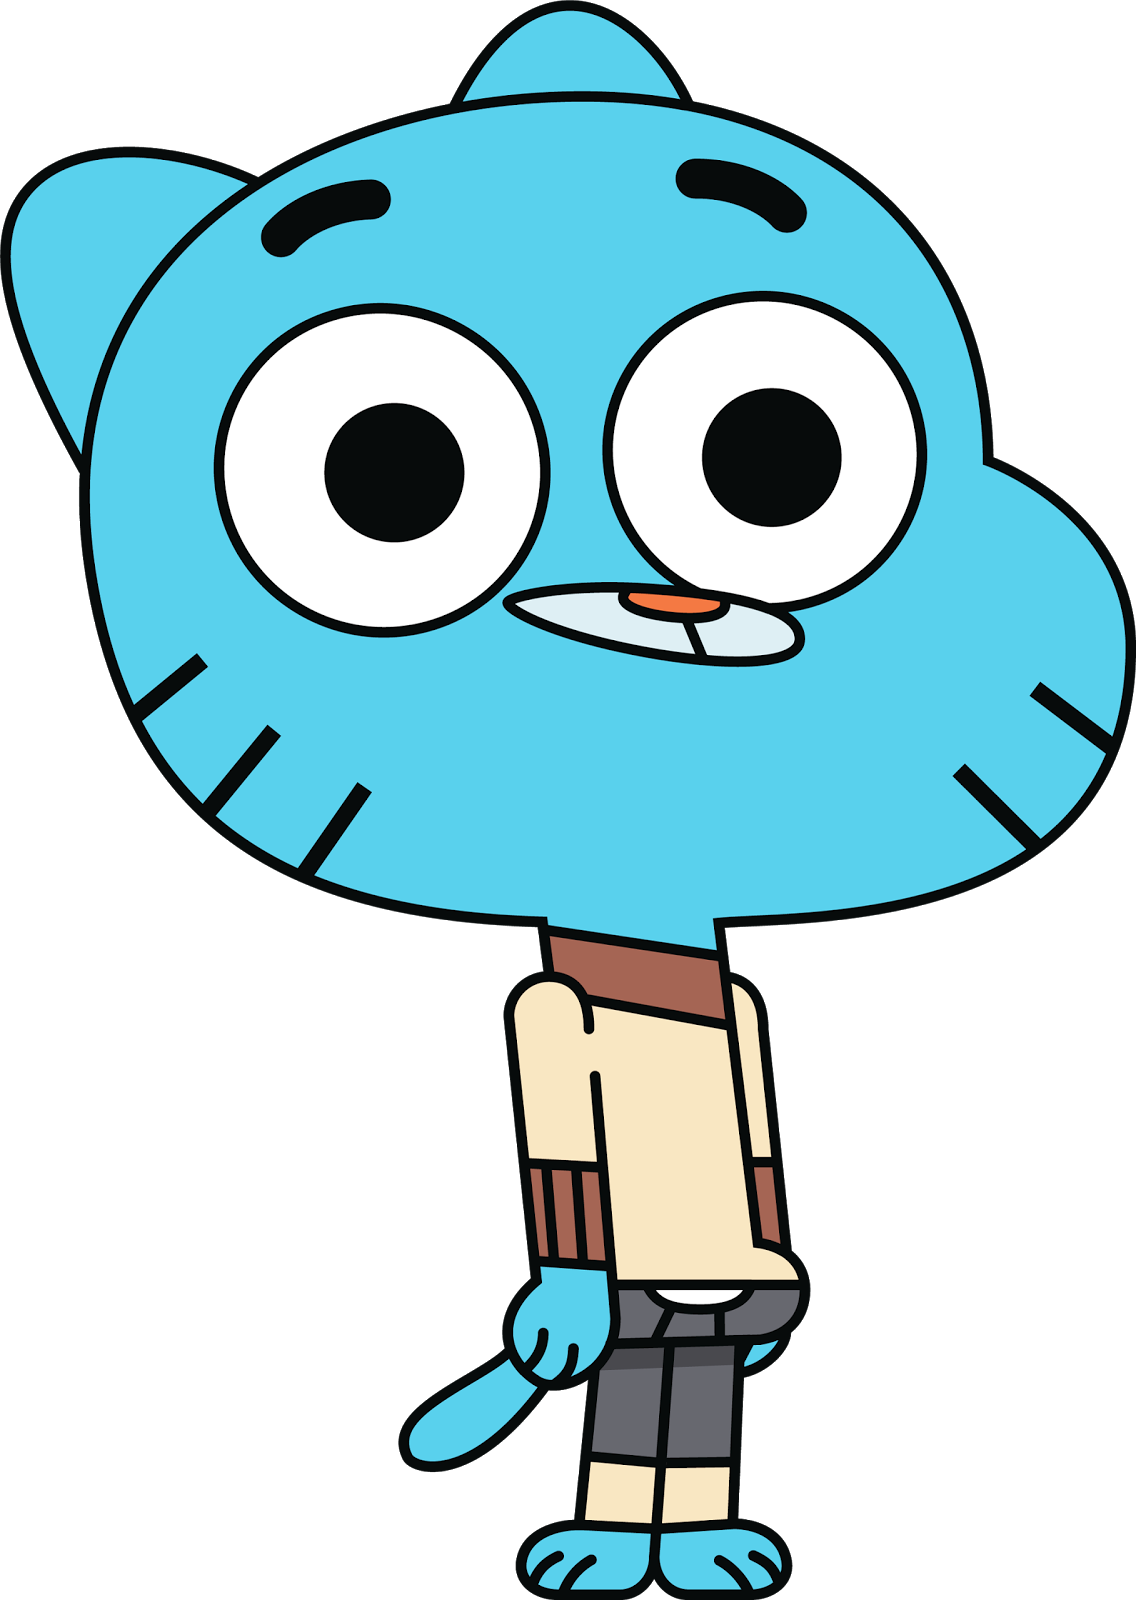 of as gumball world Amazing